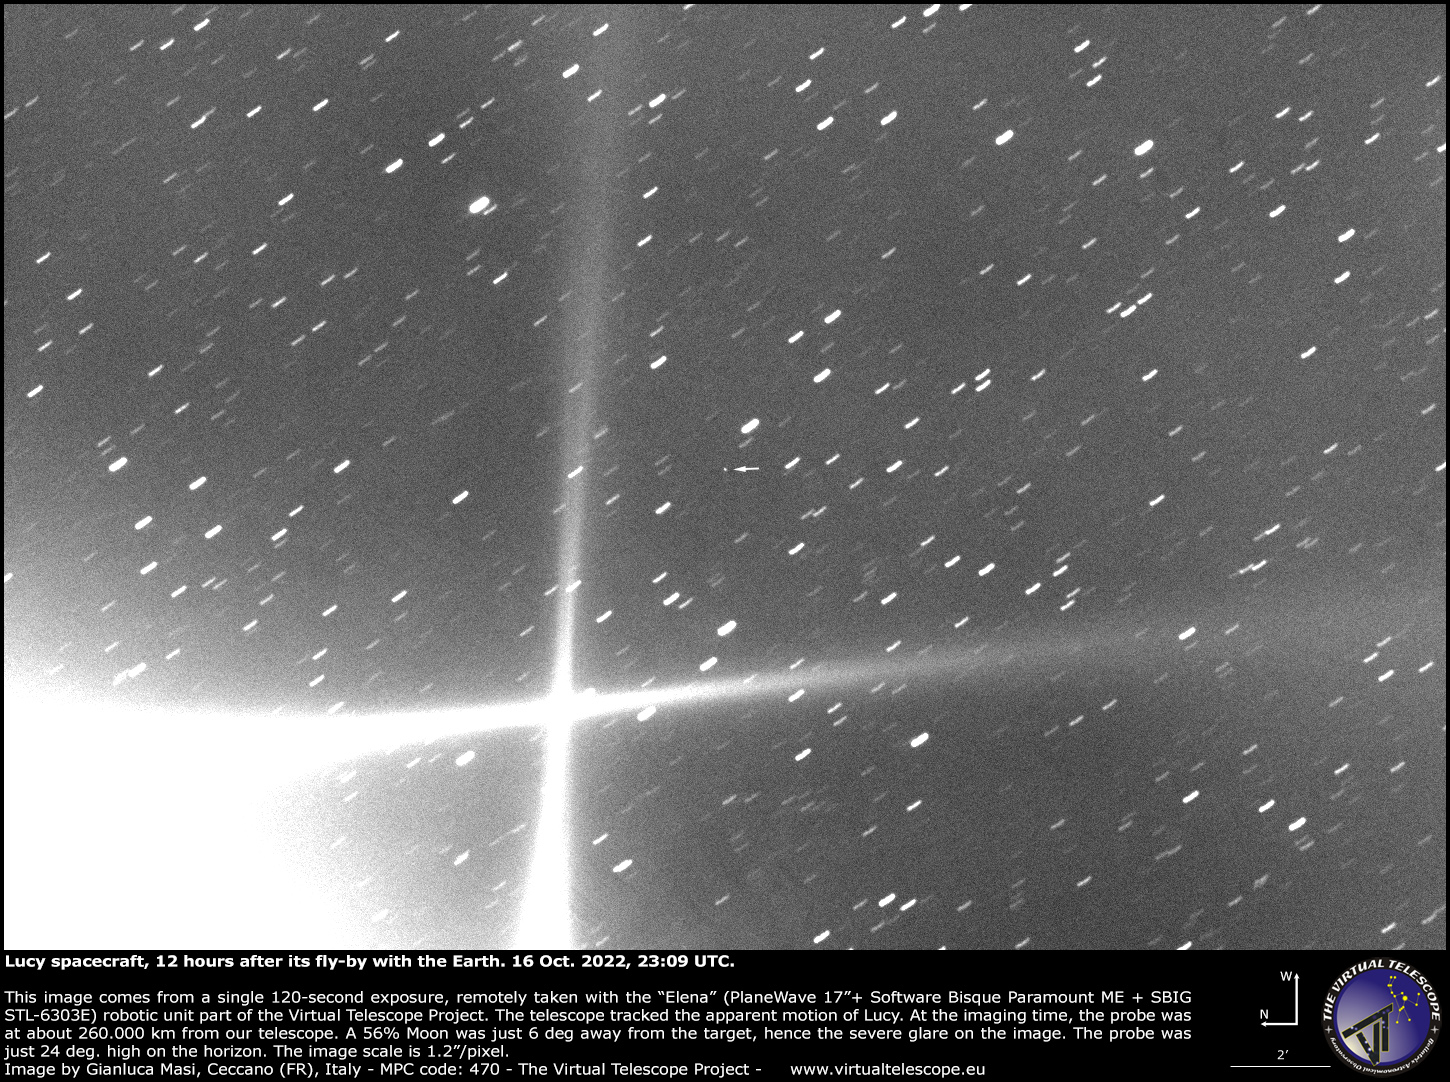 The Lucy spacecraft, imaged on 16 Oct. 2022, 12 hours after its fly-by with the Earth.